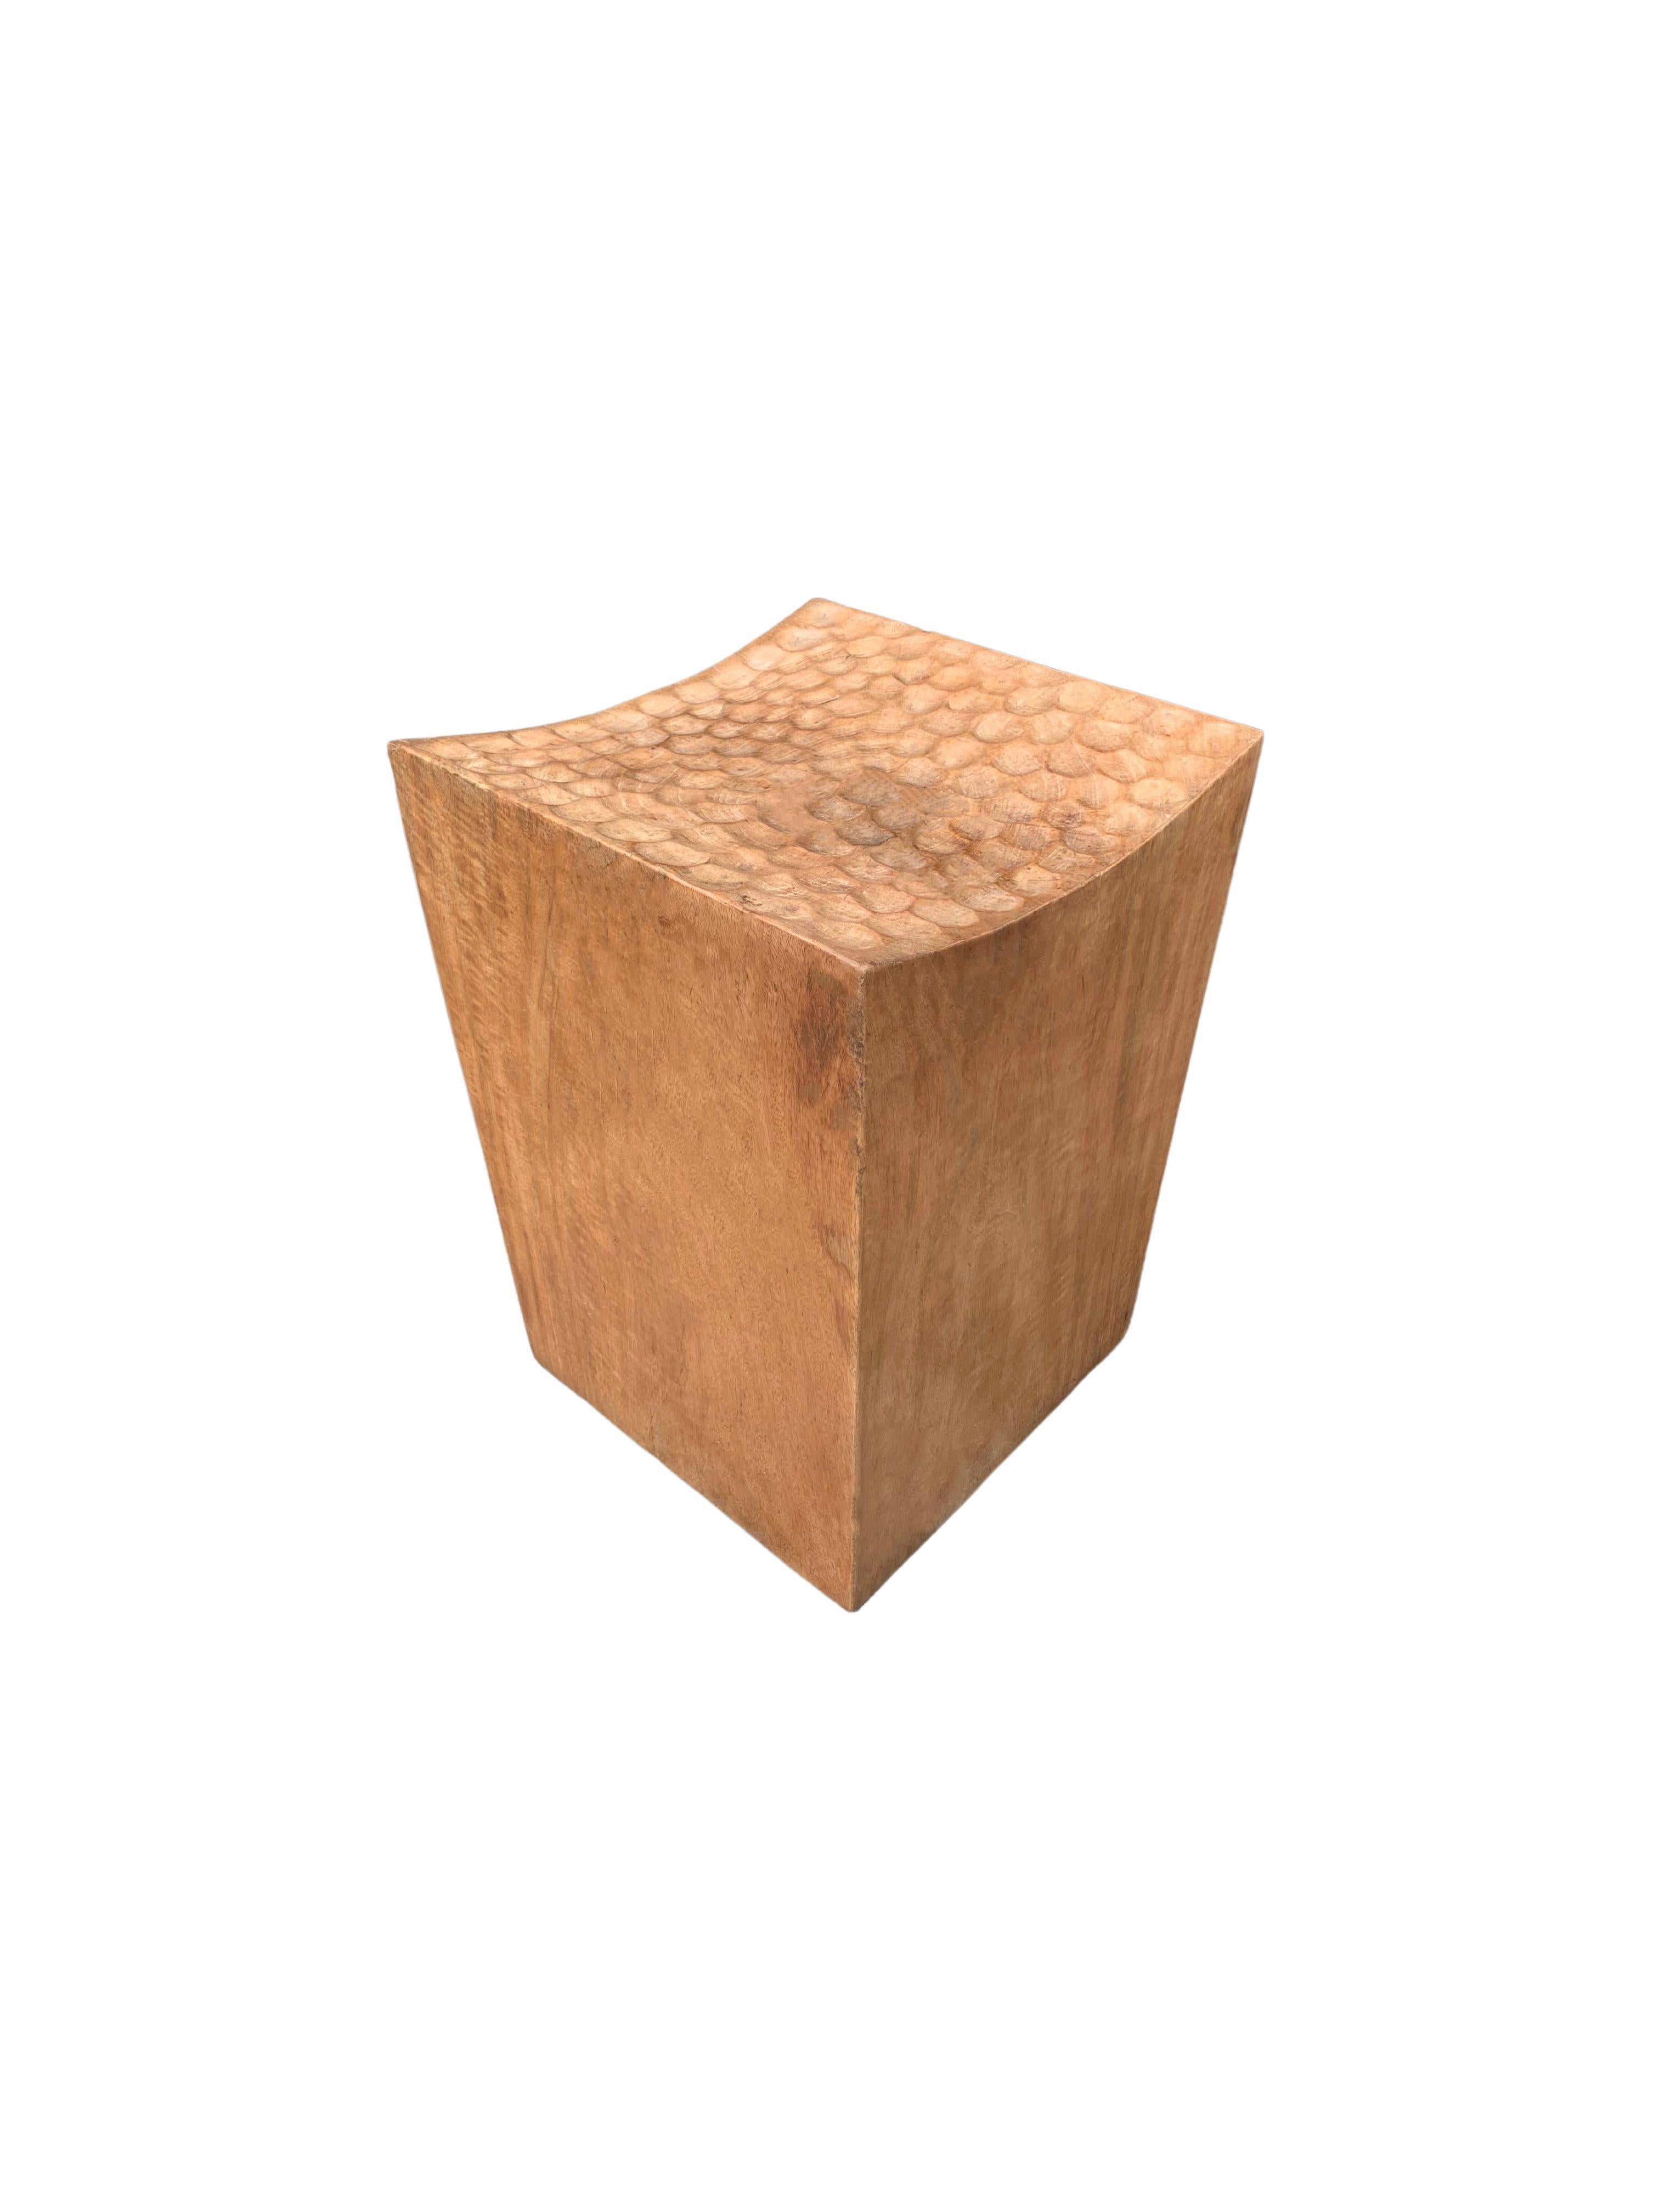 Sculptural Stool Carved from Solid Mango Wood Modern Organic In New Condition For Sale In Jimbaran, Bali